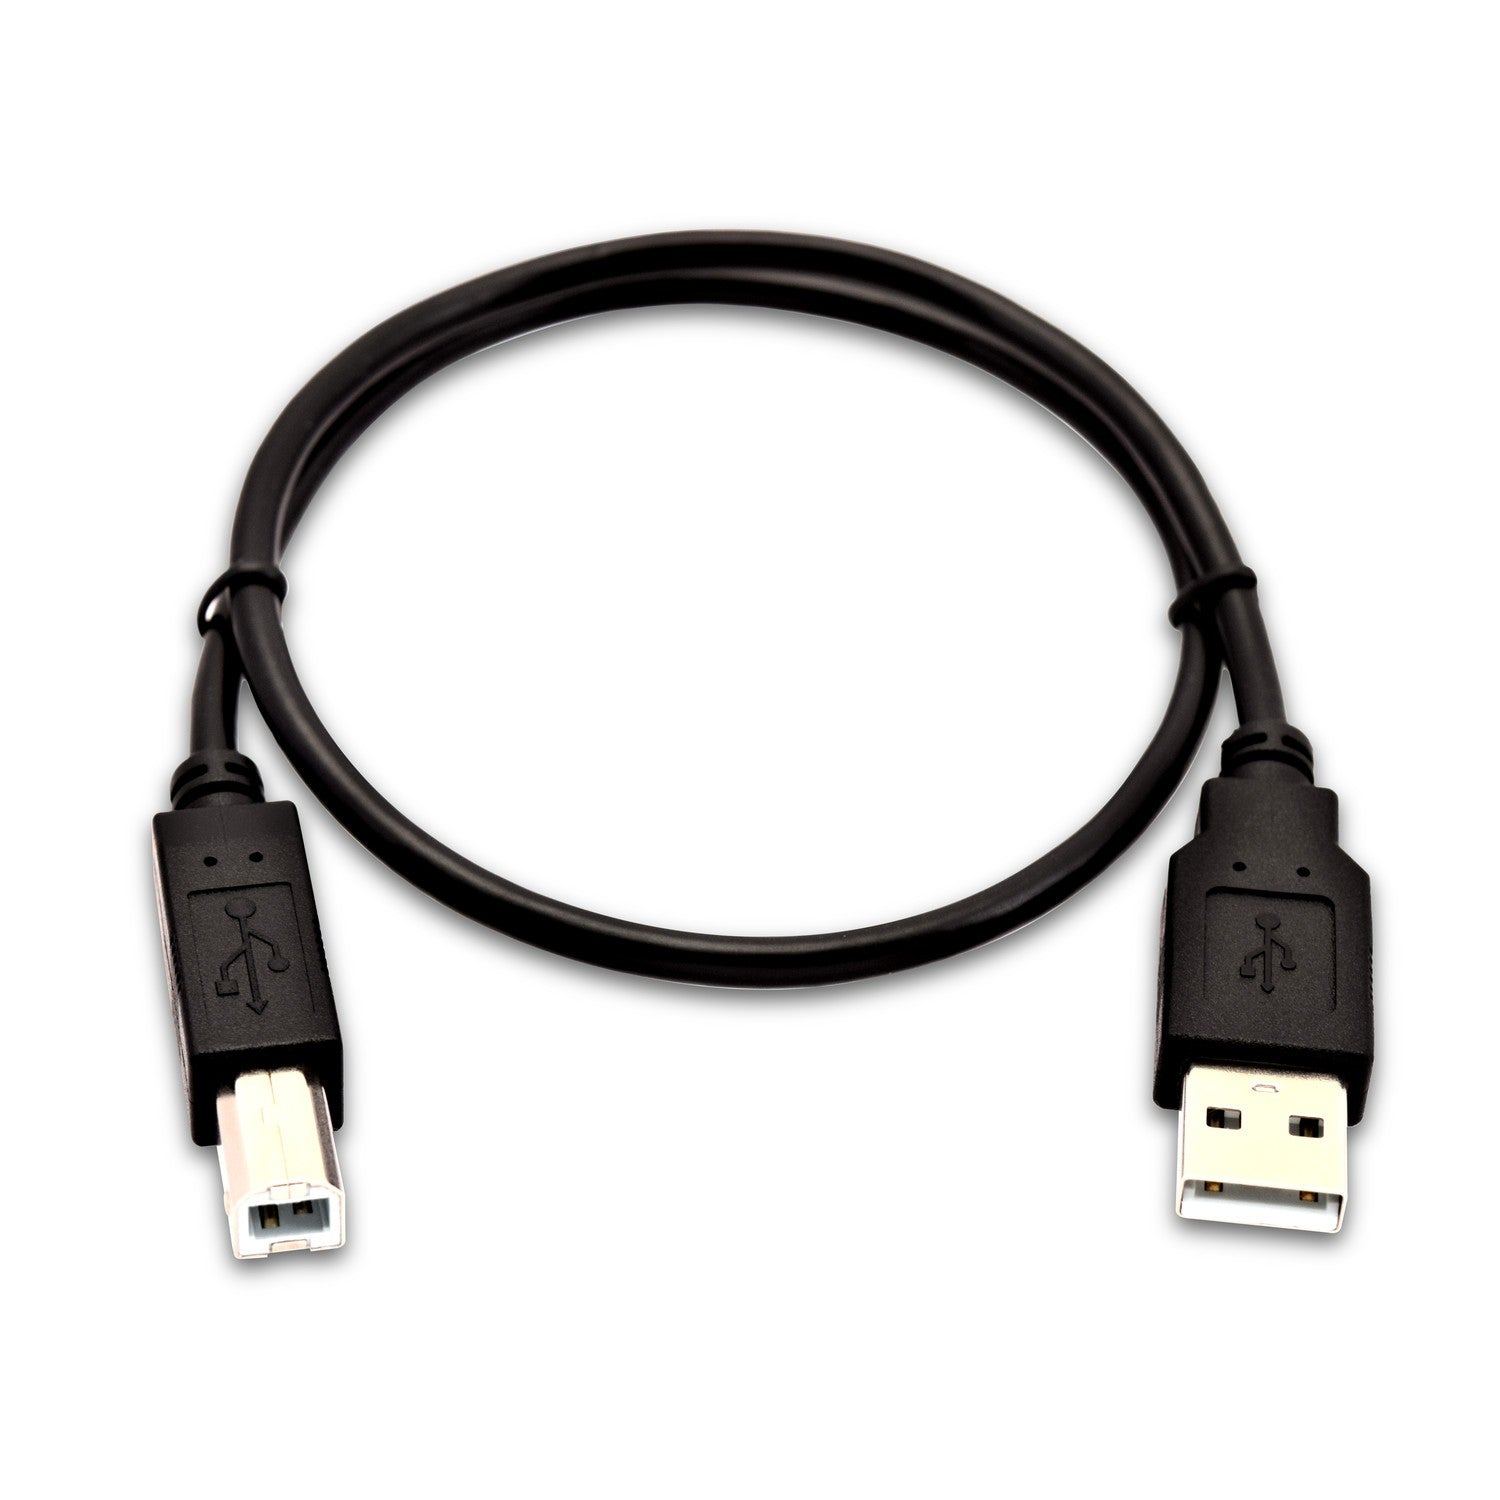 V7 Black USB Cable USB 2.0 A Male to USB 2.0 B Male 0.5m 1.6ft